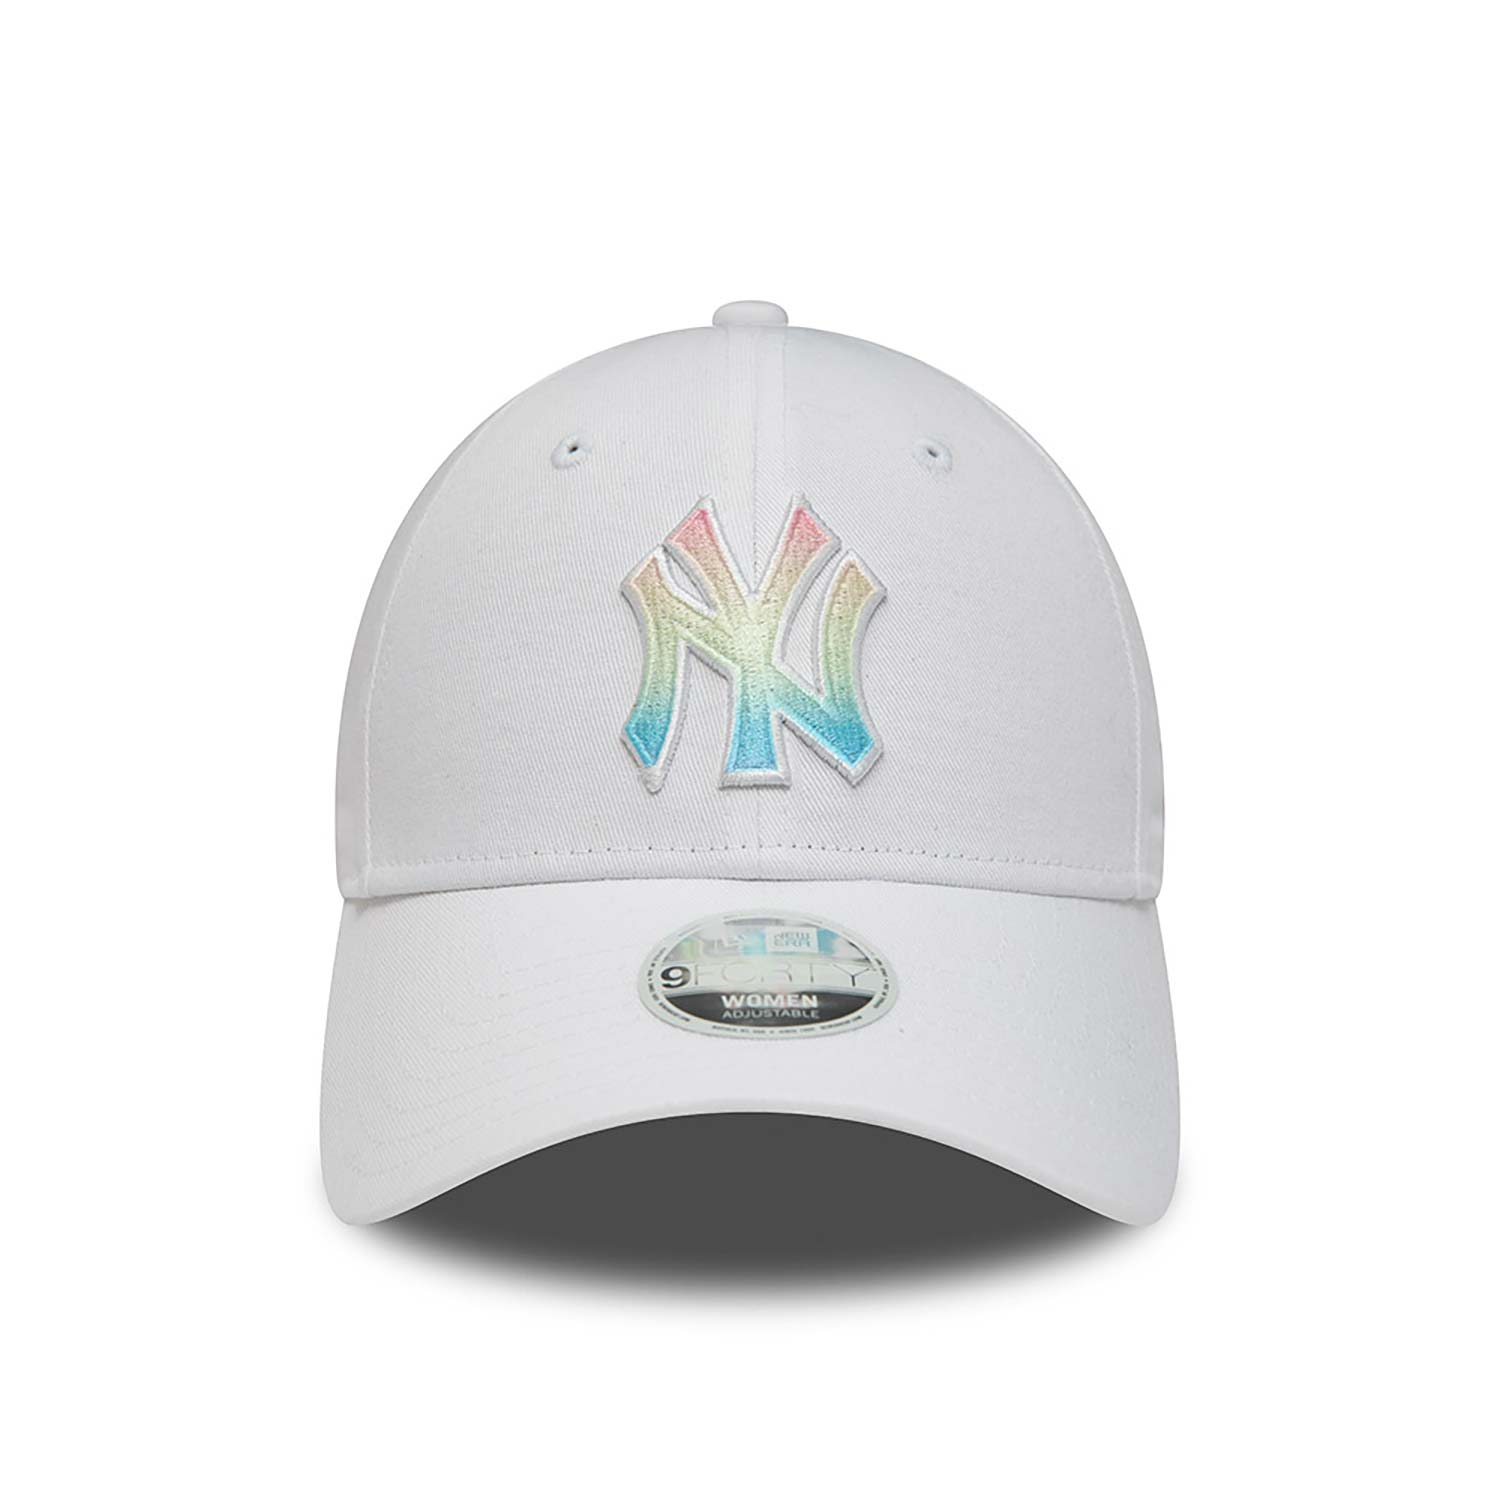 New York Yankees Womens Ombre Infill White 9FORTY Adjustable Cap